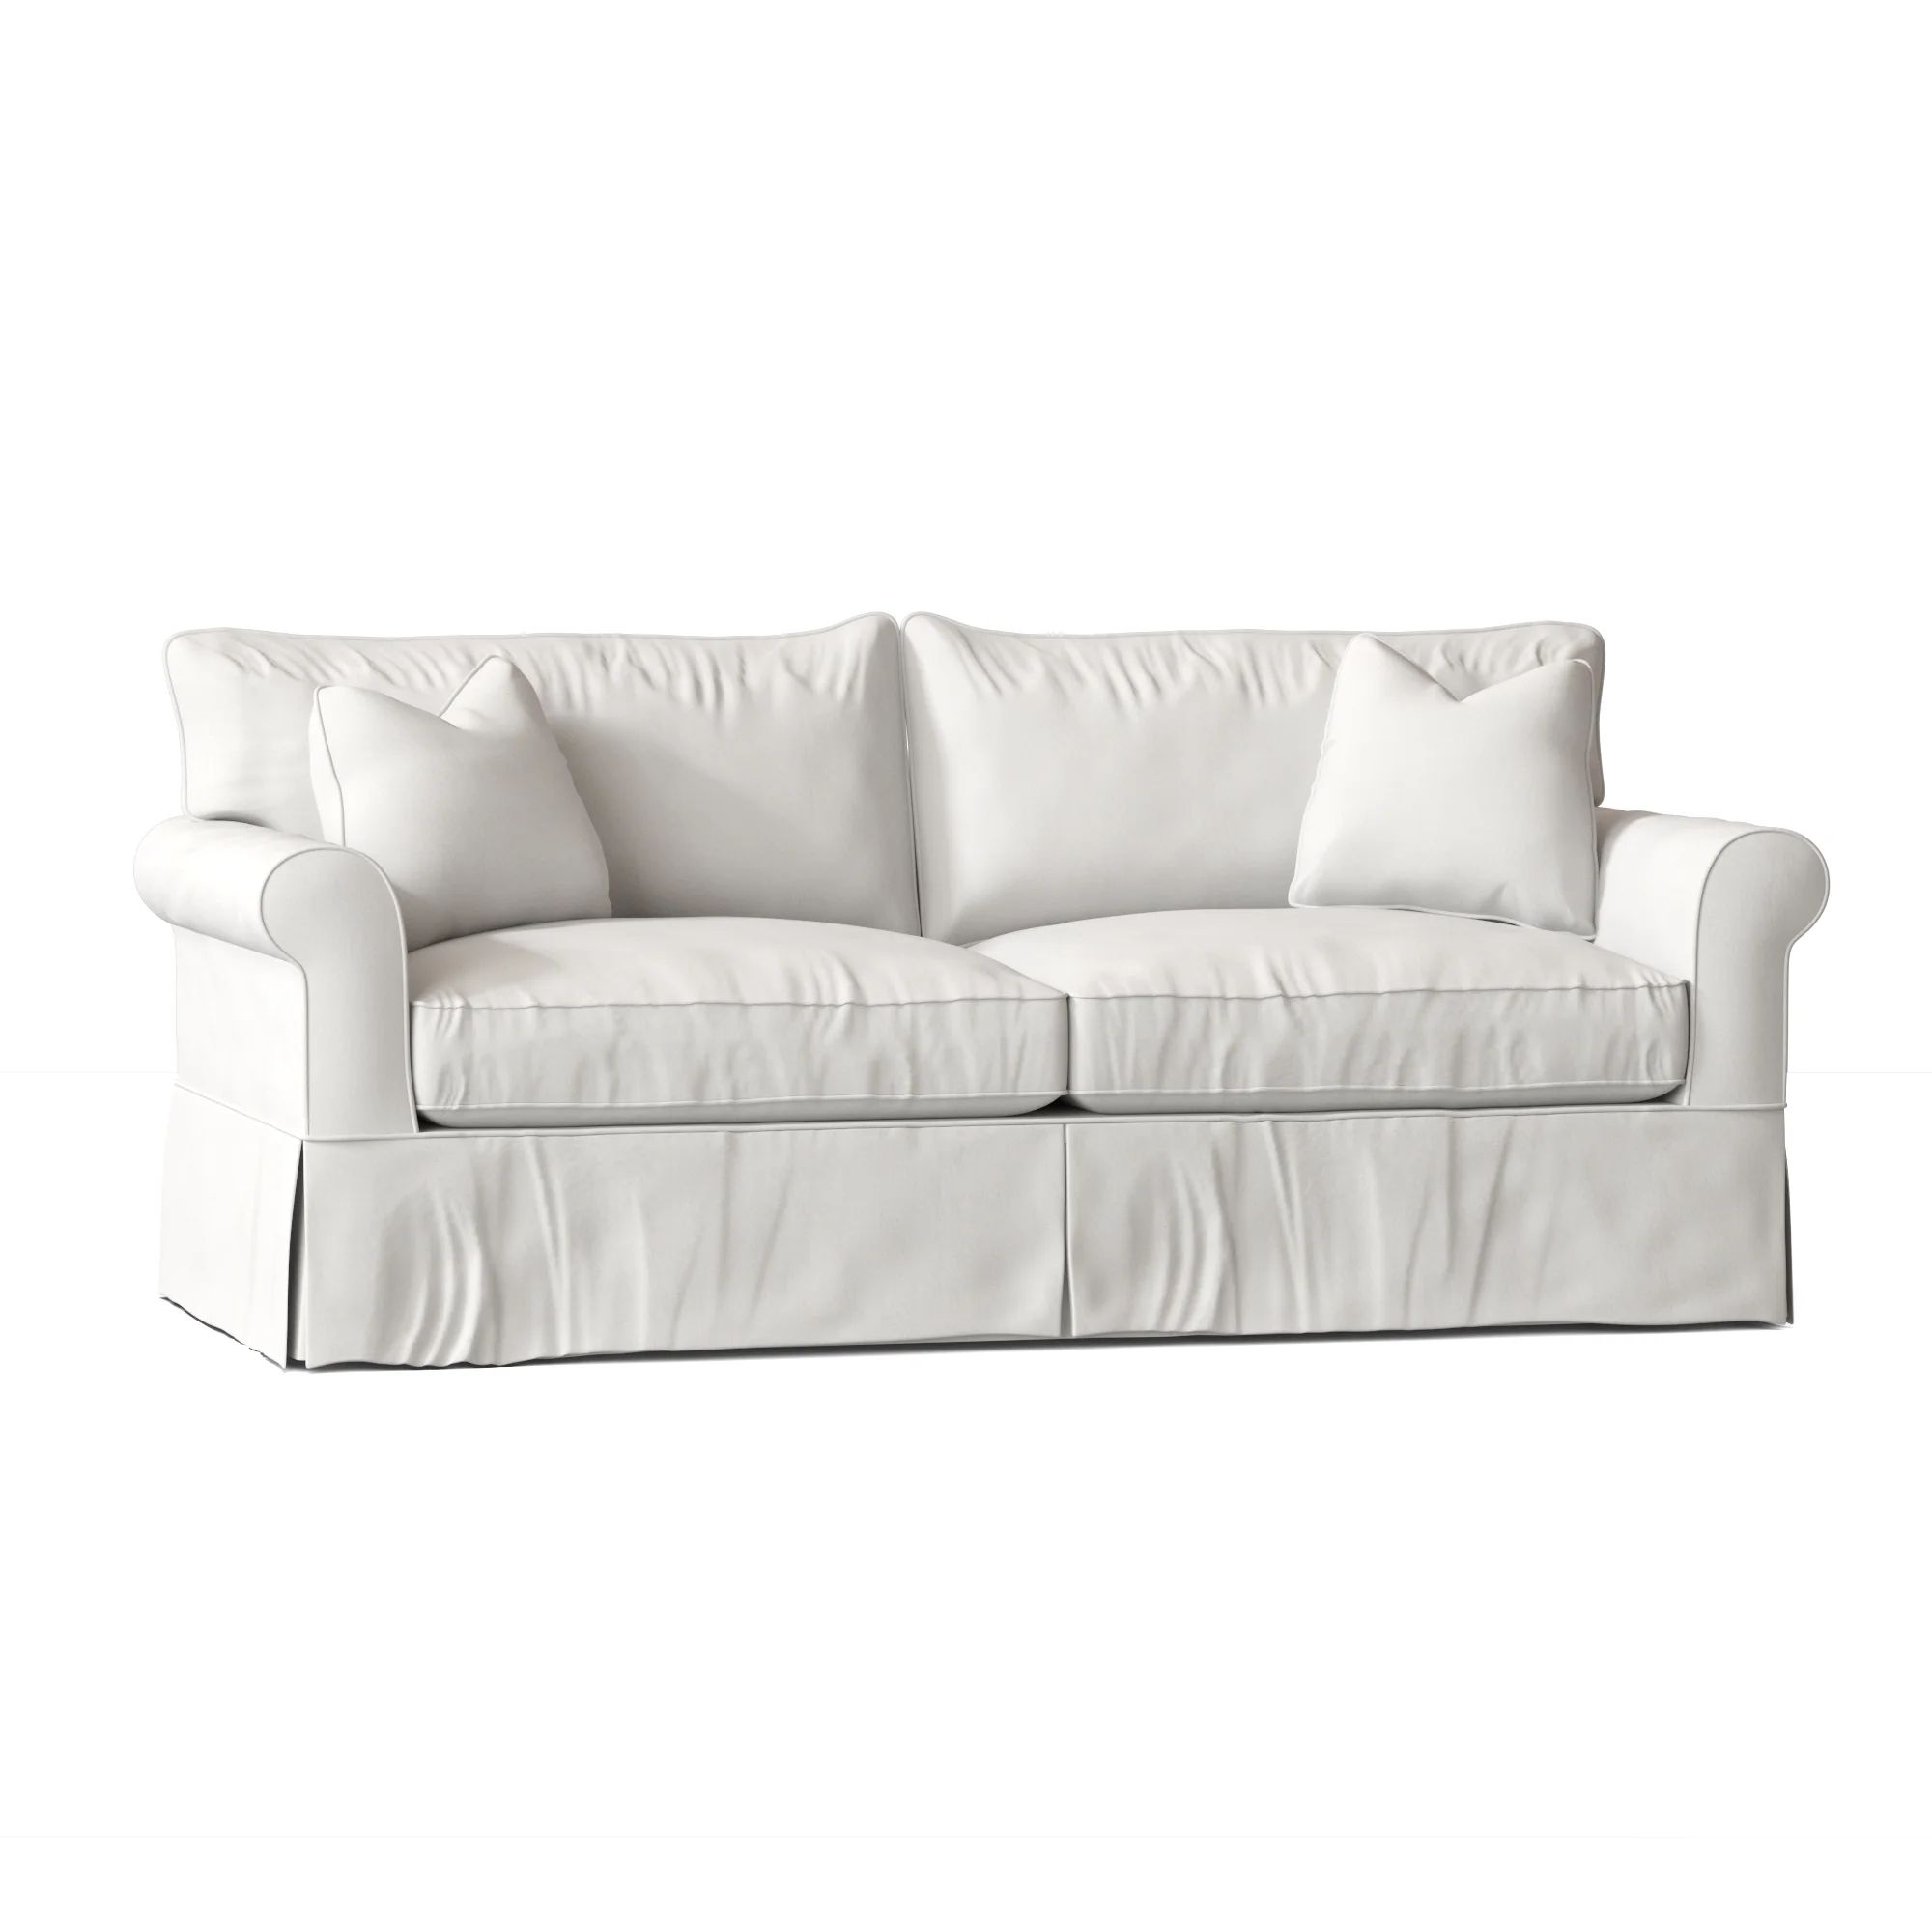 Amari 84'' Rolled Arm Slipcovered Sofa Bed with Reversible Cushions | Wayfair North America